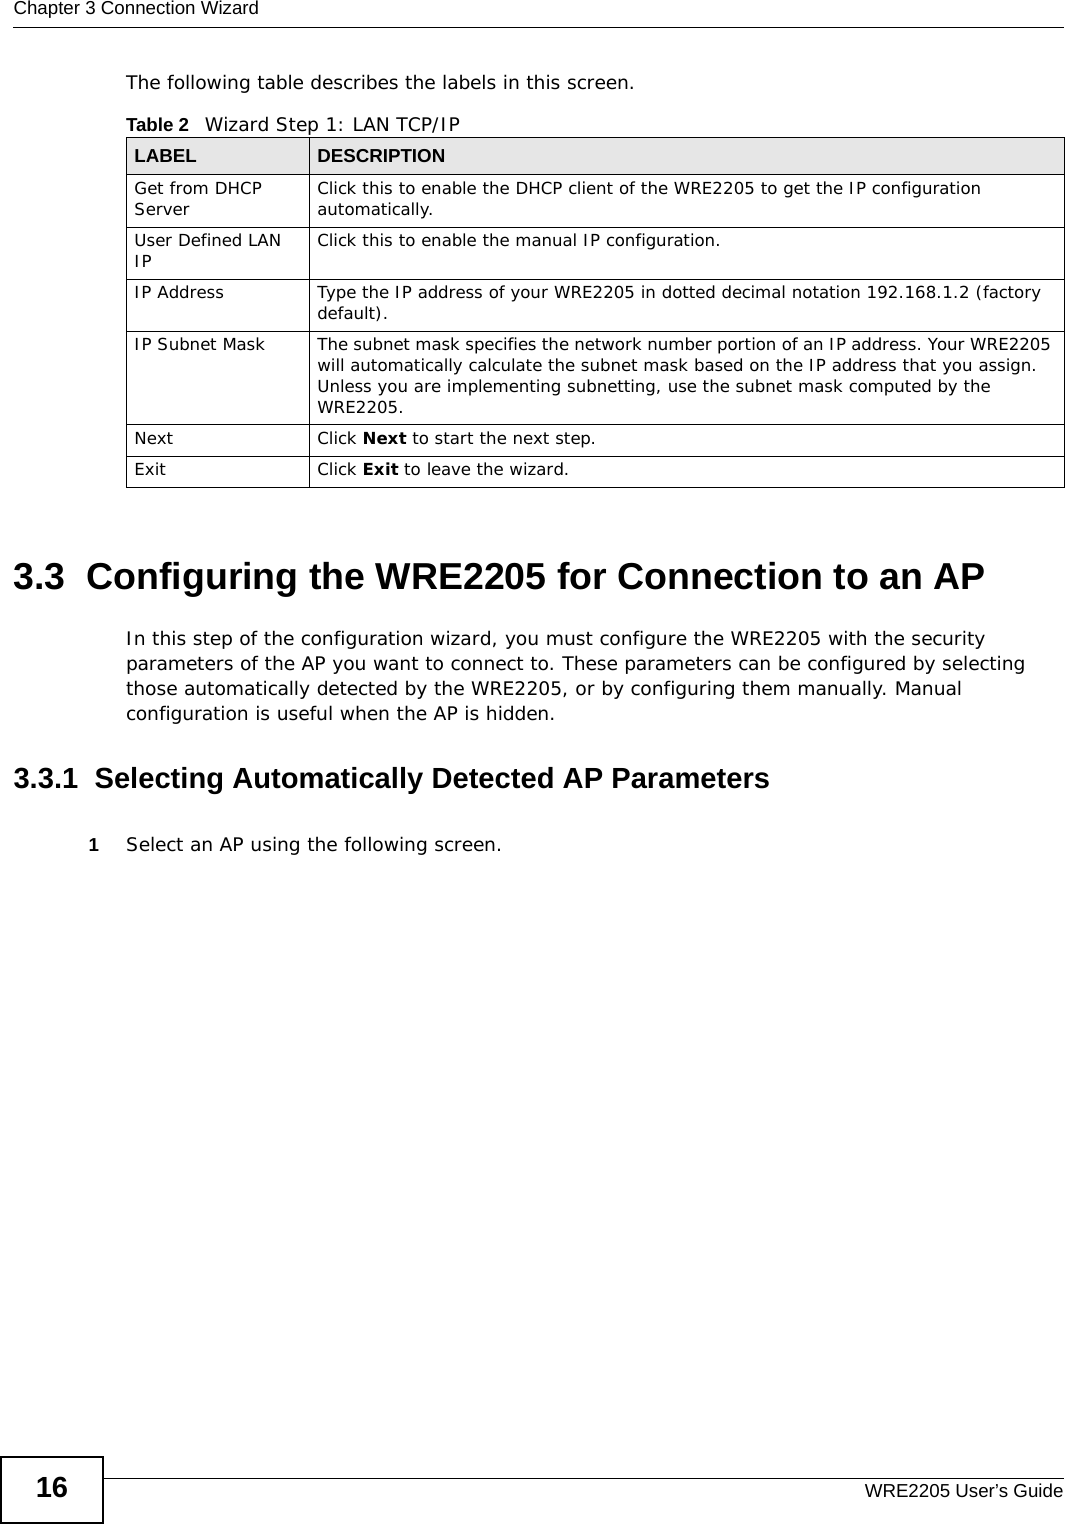 Chapter 3 Connection WizardWRE2205 User’s Guide16The following table describes the labels in this screen.3.3  Configuring the WRE2205 for Connection to an APIn this step of the configuration wizard, you must configure the WRE2205 with the security parameters of the AP you want to connect to. These parameters can be configured by selecting those automatically detected by the WRE2205, or by configuring them manually. Manual configuration is useful when the AP is hidden.3.3.1  Selecting Automatically Detected AP Parameters1Select an AP using the following screen.Table 2   Wizard Step 1: LAN TCP/IPLABEL DESCRIPTIONGet from DHCP Server Click this to enable the DHCP client of the WRE2205 to get the IP configuration automatically.User Defined LAN IP Click this to enable the manual IP configuration.IP Address Type the IP address of your WRE2205 in dotted decimal notation 192.168.1.2 (factory default).IP Subnet Mask The subnet mask specifies the network number portion of an IP address. Your WRE2205 will automatically calculate the subnet mask based on the IP address that you assign. Unless you are implementing subnetting, use the subnet mask computed by the WRE2205.Next Click Next to start the next step.Exit Click Exit to leave the wizard.